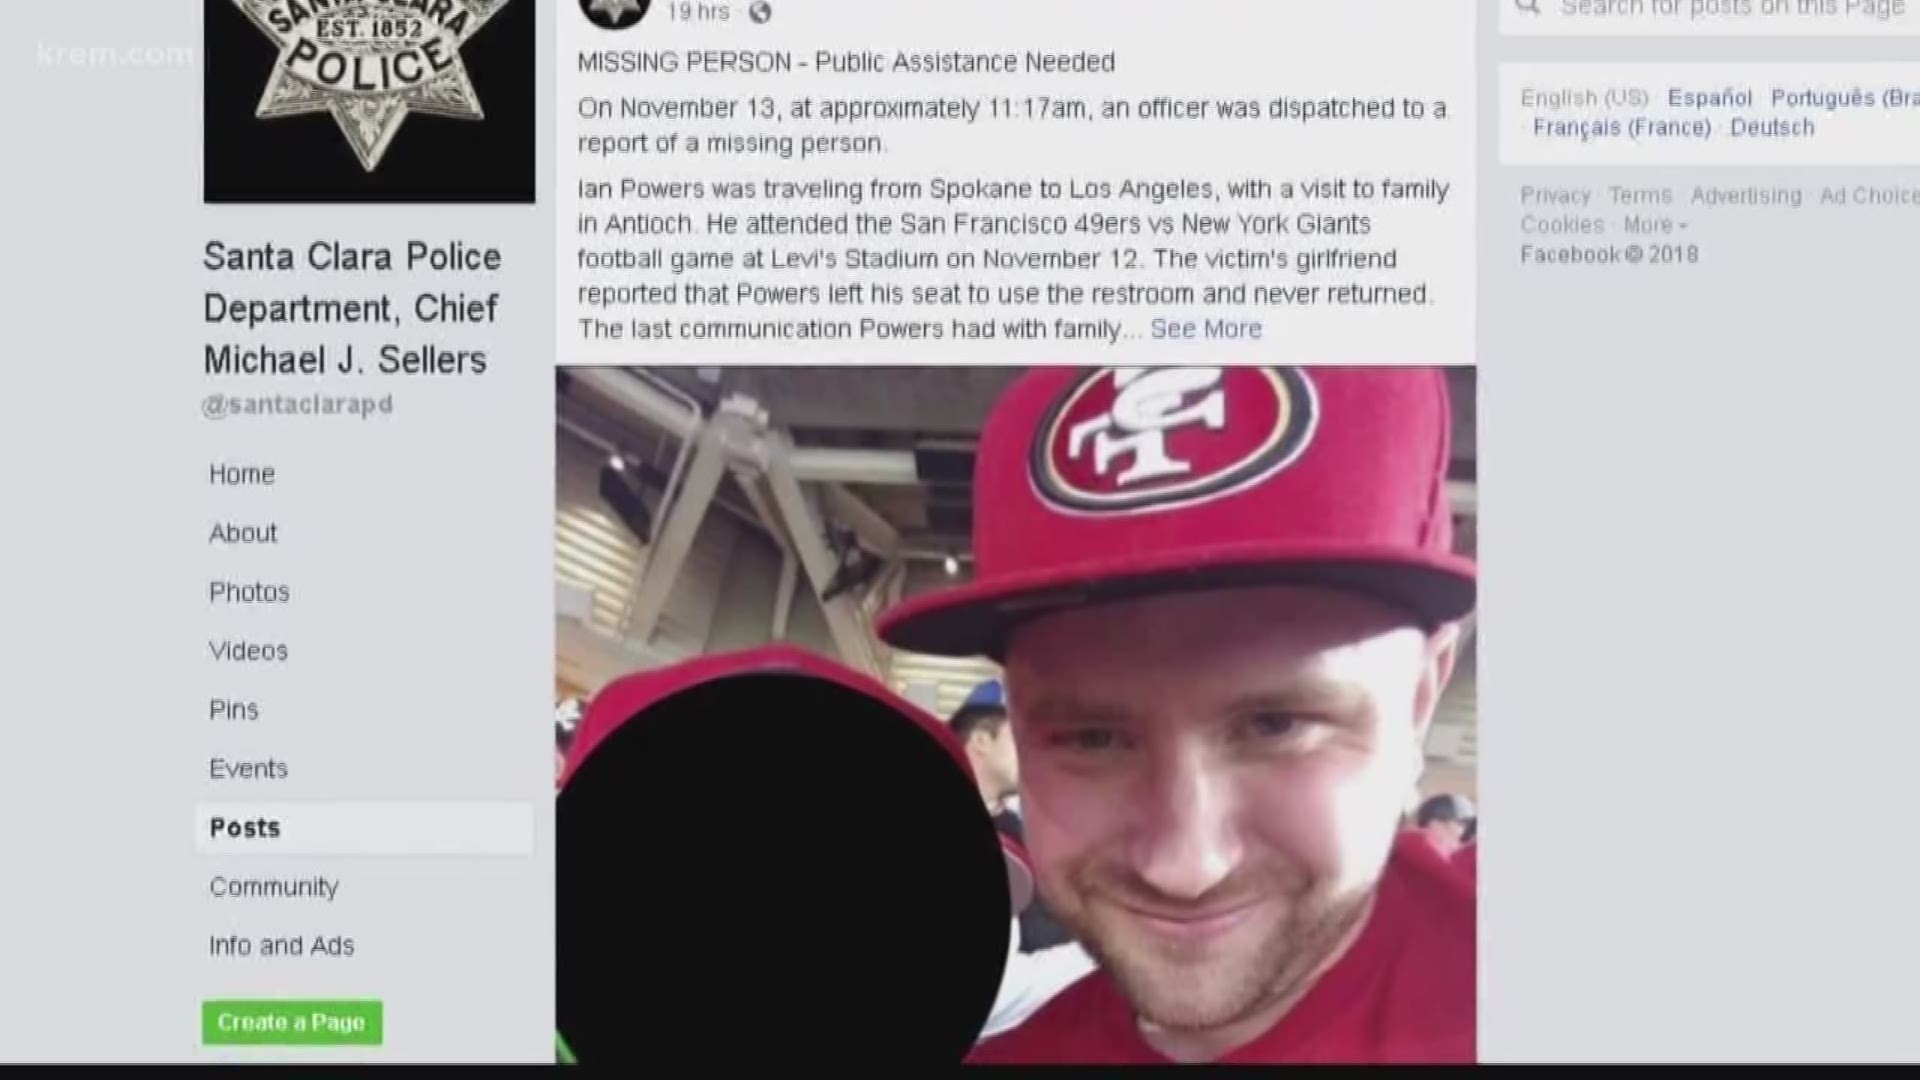 Ian Powers attended a 49ers game at Levi's Stadium in Santa Clara on Monday. His girlfriend reported that he left his seat to use the restroom and never returned, police said.